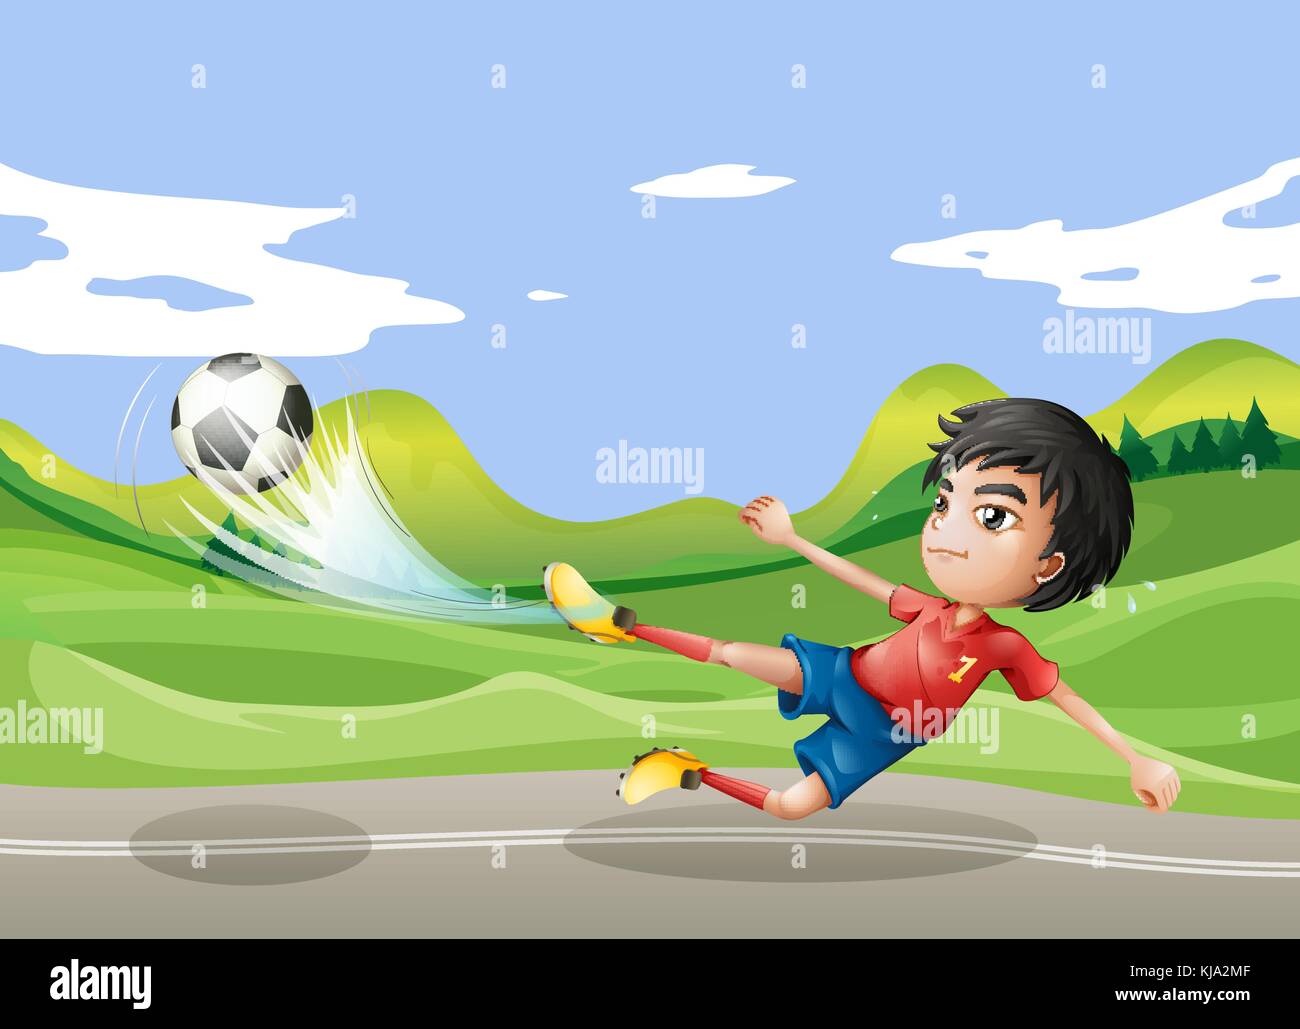 Illustration of a player playing soccer at the street Stock Vector